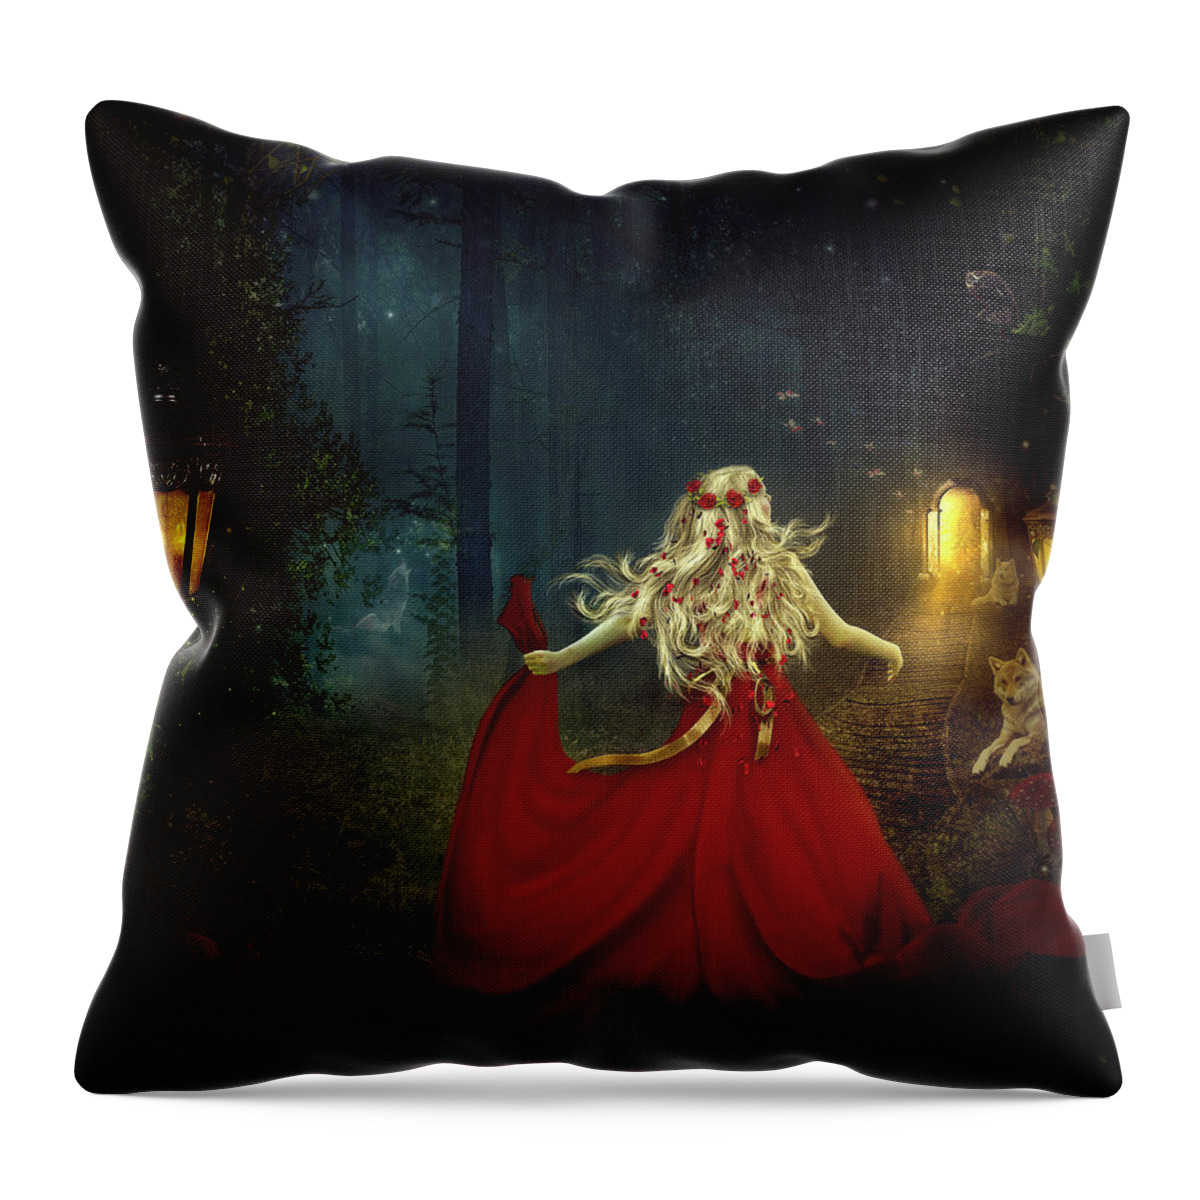 Girl Throw Pillow featuring the digital art The Forest by Maggy Pease